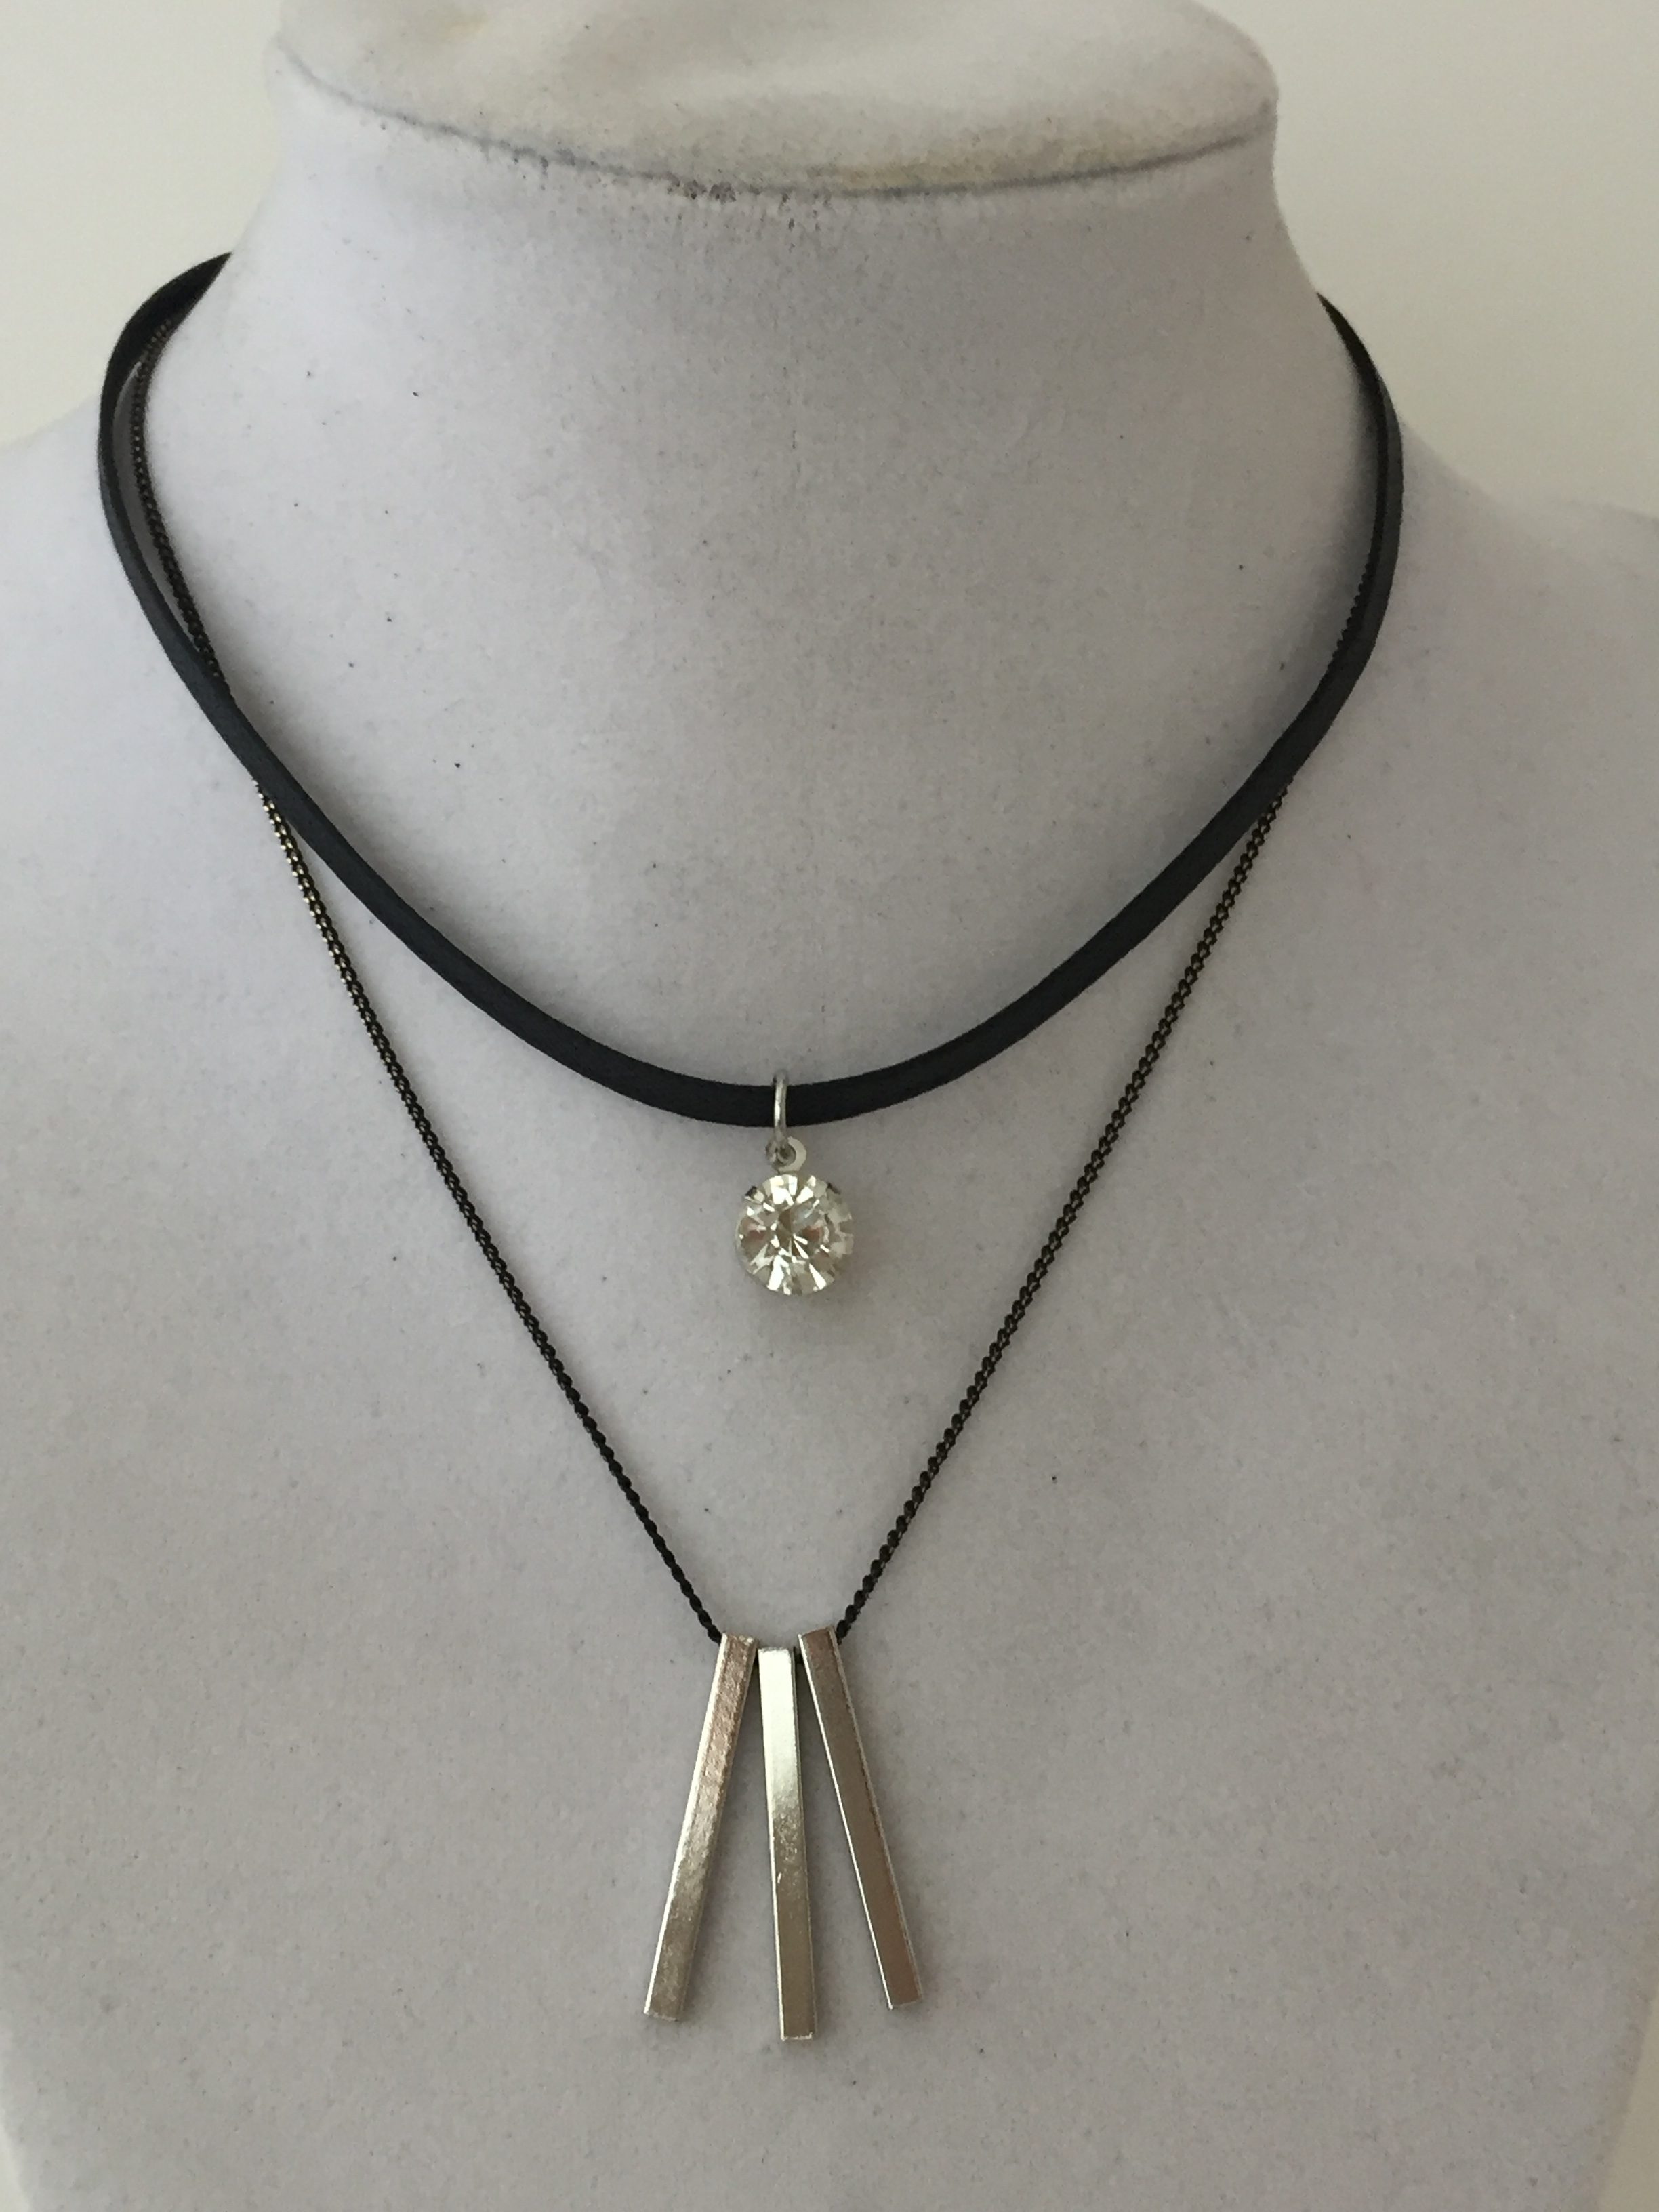 choker necklace with stone pendant